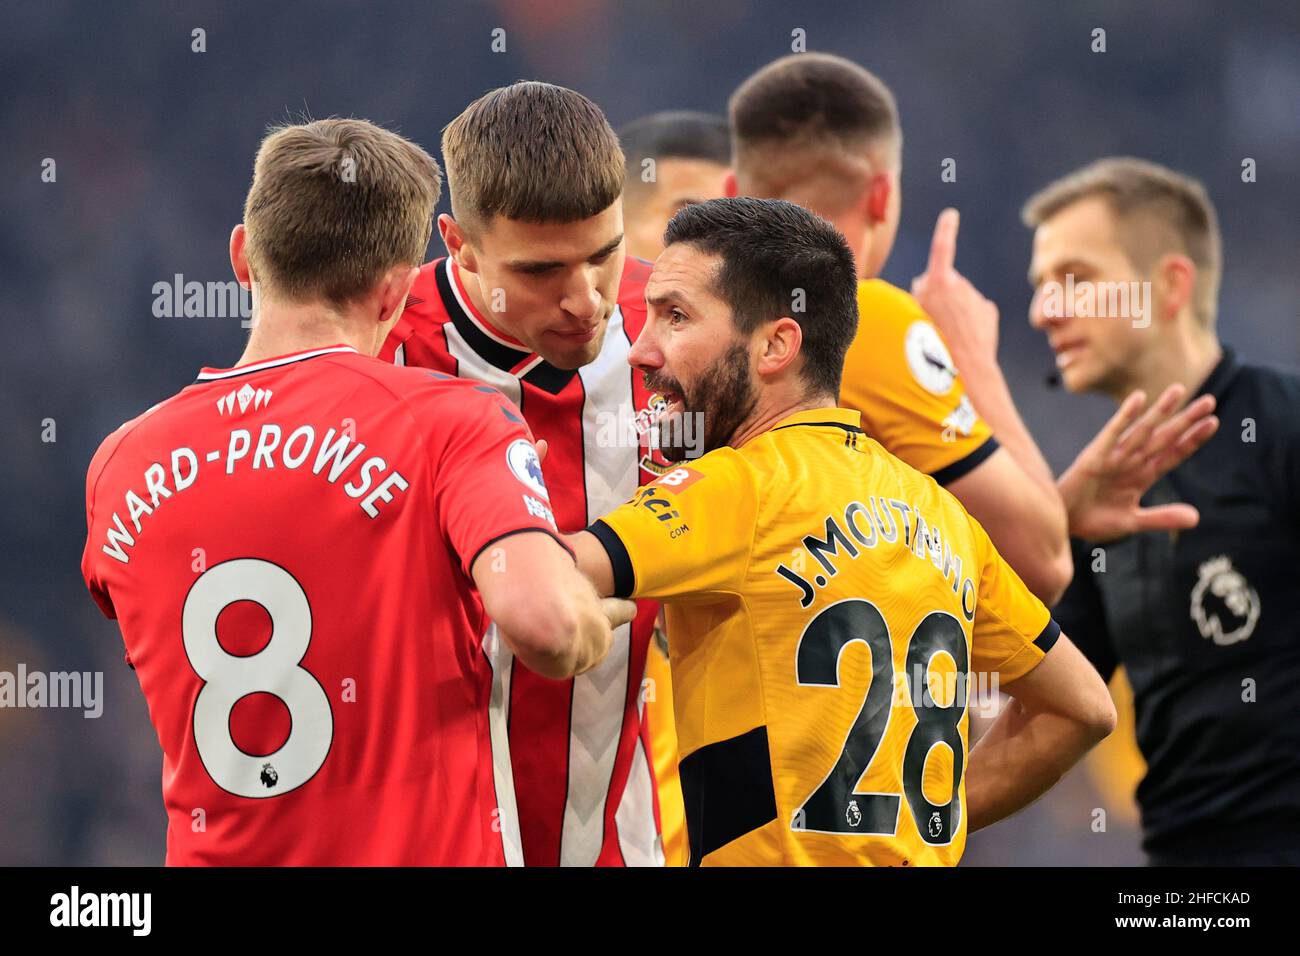 Wolverhampton, UK. 15th Jan, 2022. Joao Moutinho #28 of Wolverhampton Wanderers and James Ward-Prowse #8 of Southampton argue about the penalty decision in Wolverhampton, United Kingdom on 1/15/2022. (Photo by Conor Molloy/News Images/Sipa USA) Credit: Sipa USA/Alamy Live News Stock Photo